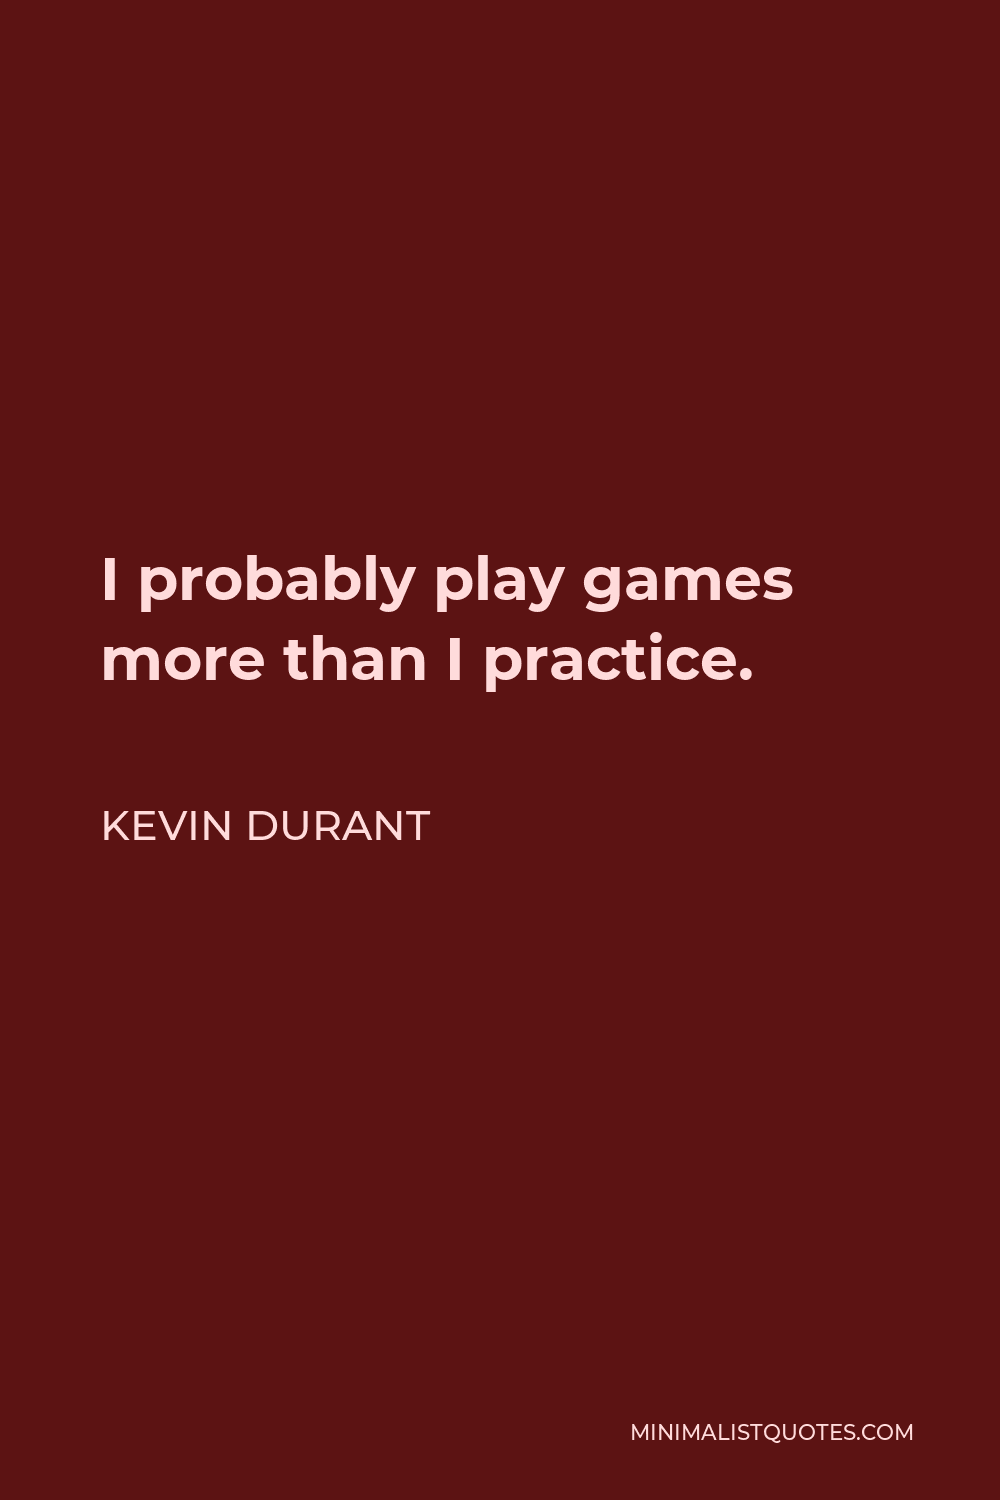 Kevin Durant Quote - I probably play games more than I practice.